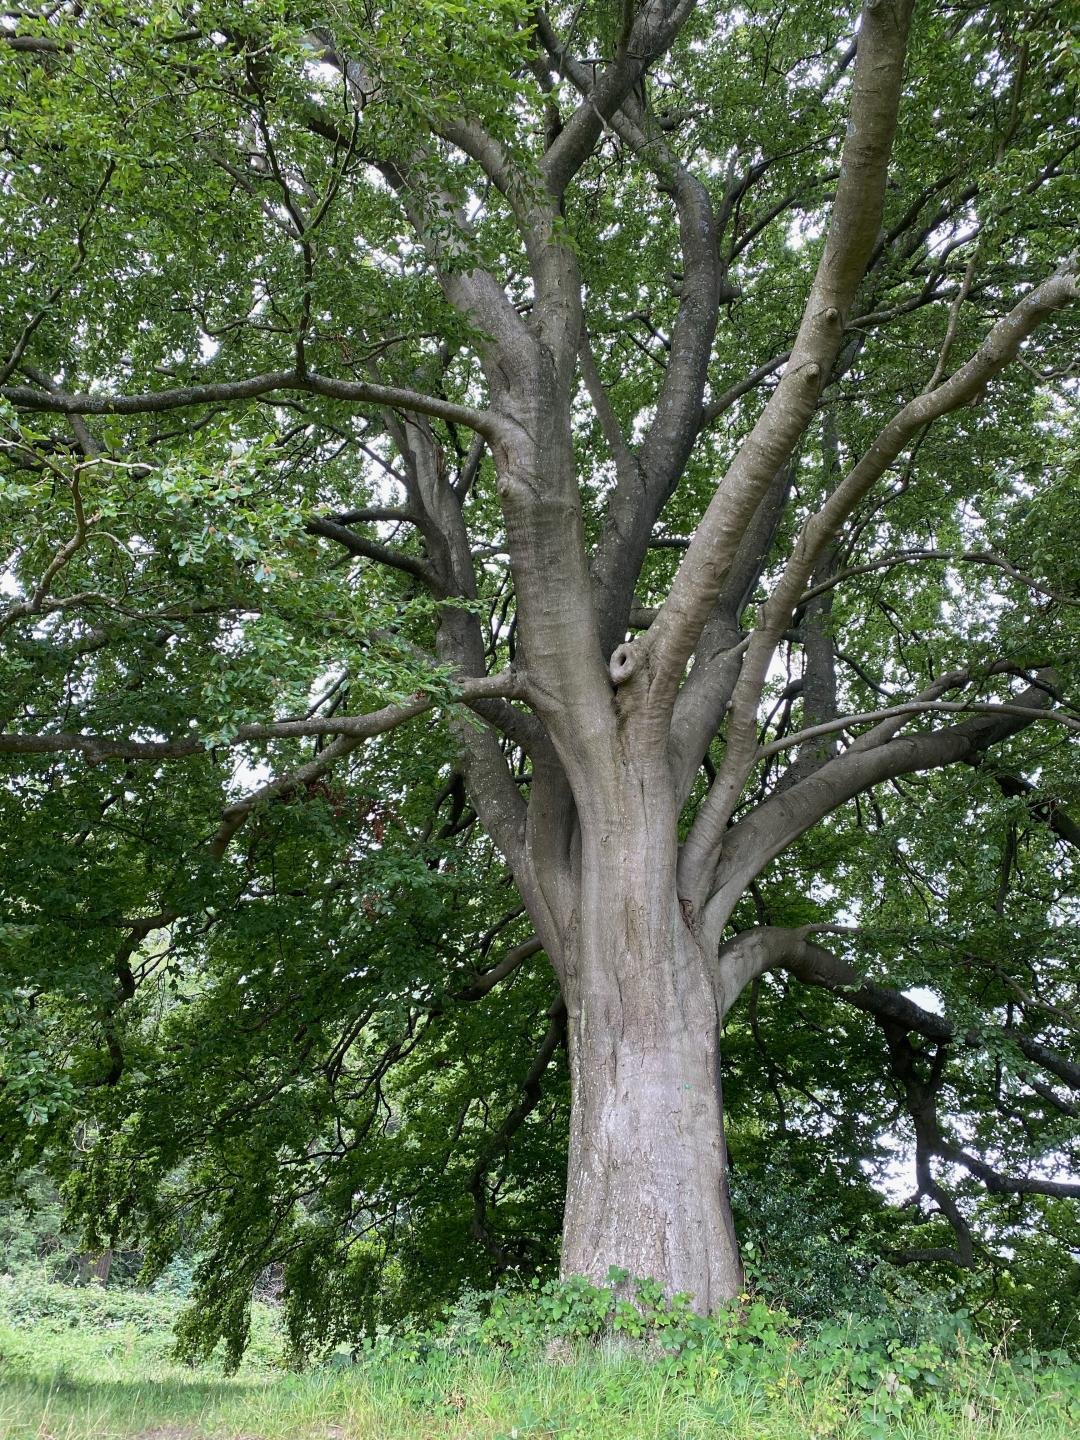 Beech tree (Fagus) with smooth gray bark, oval-shaped leaves, and dense foliage in a forest setting.

